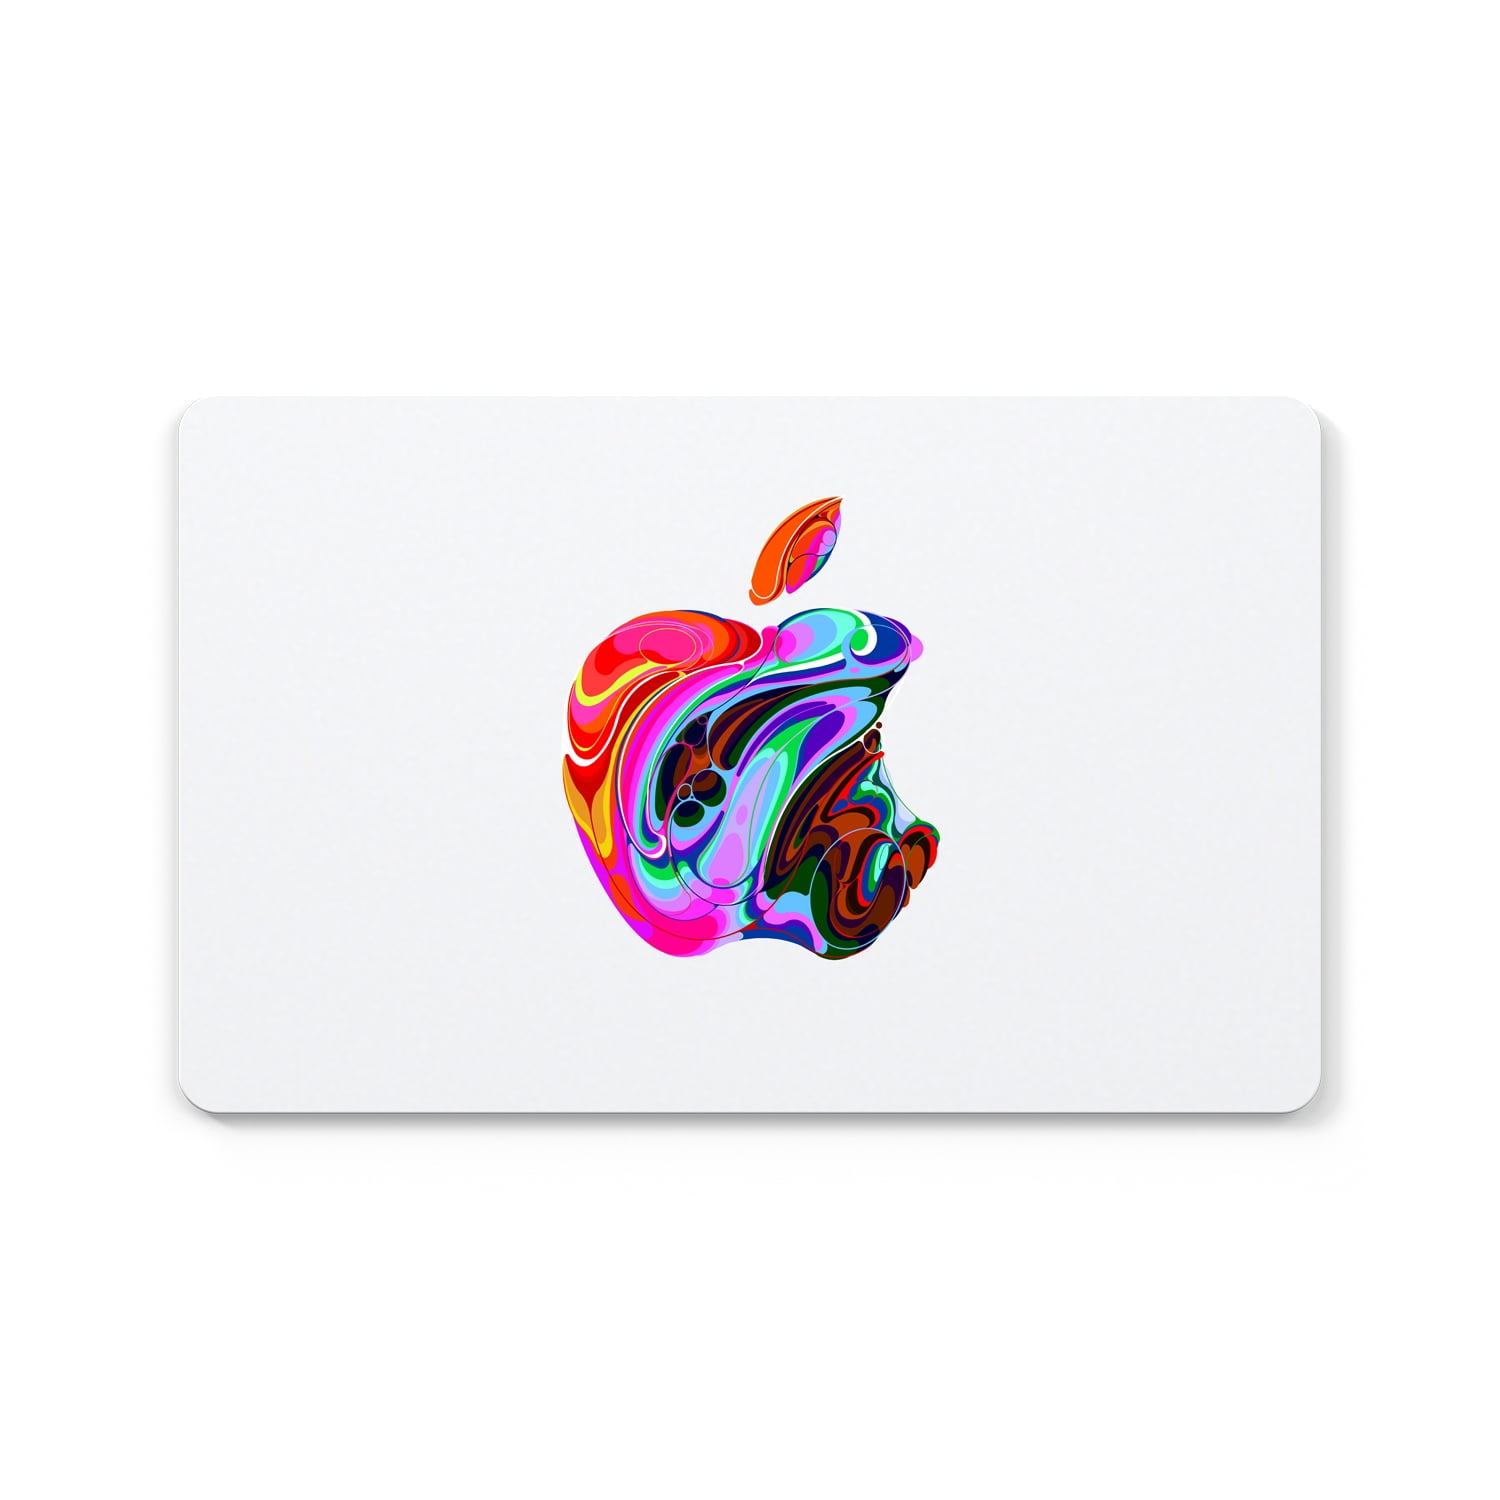 100 Apple Card (Email Gift Delivery)